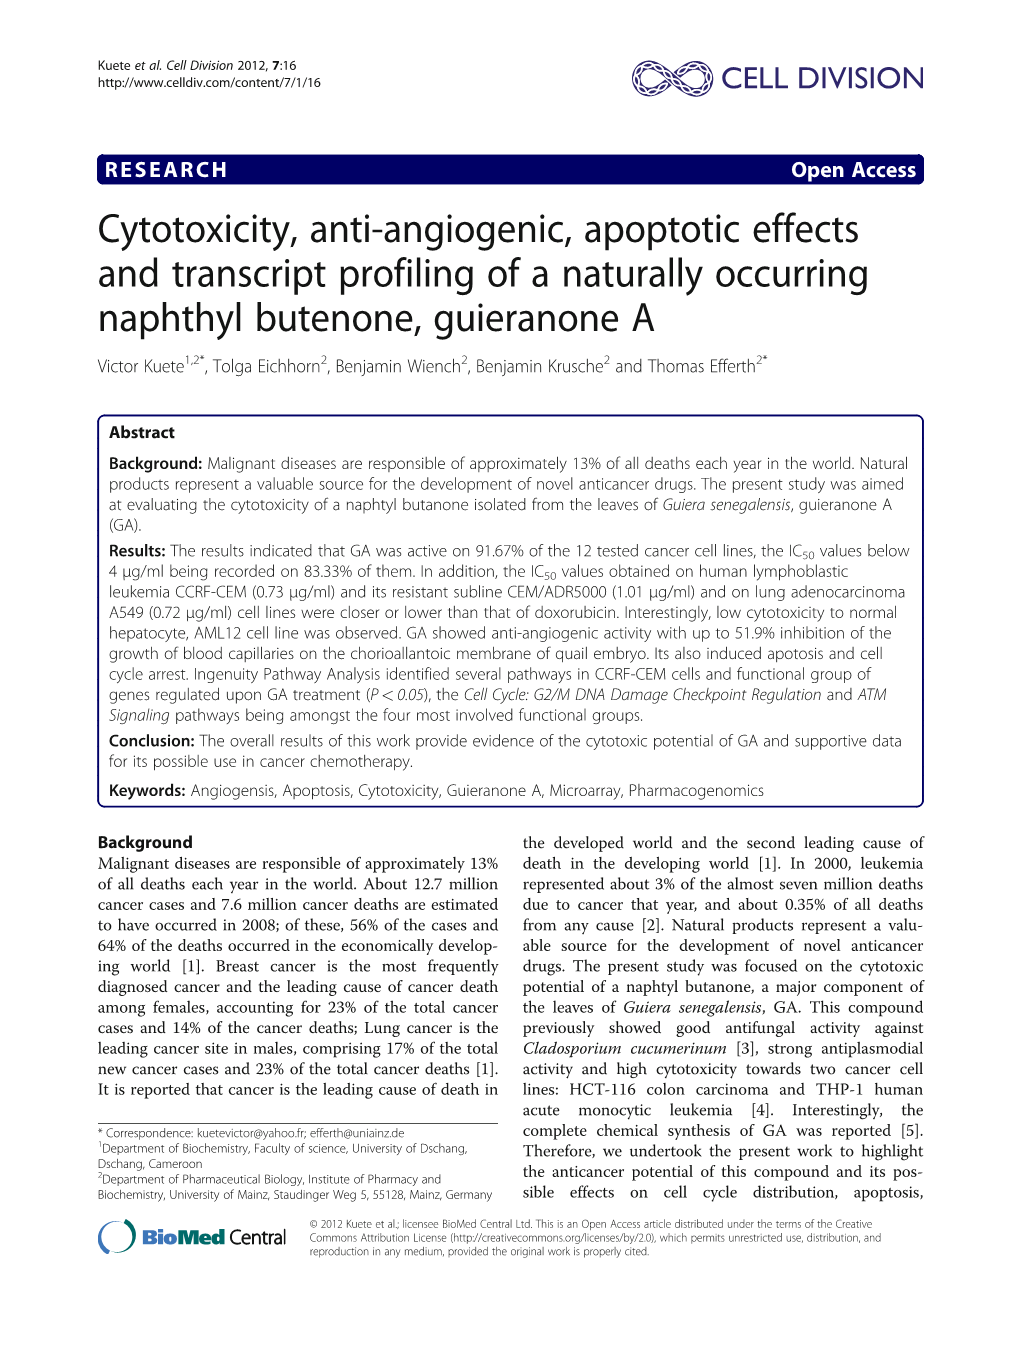 Cytotoxicity, Anti-Angiogenic, Apoptotic Effects and Transcript Profiling of A